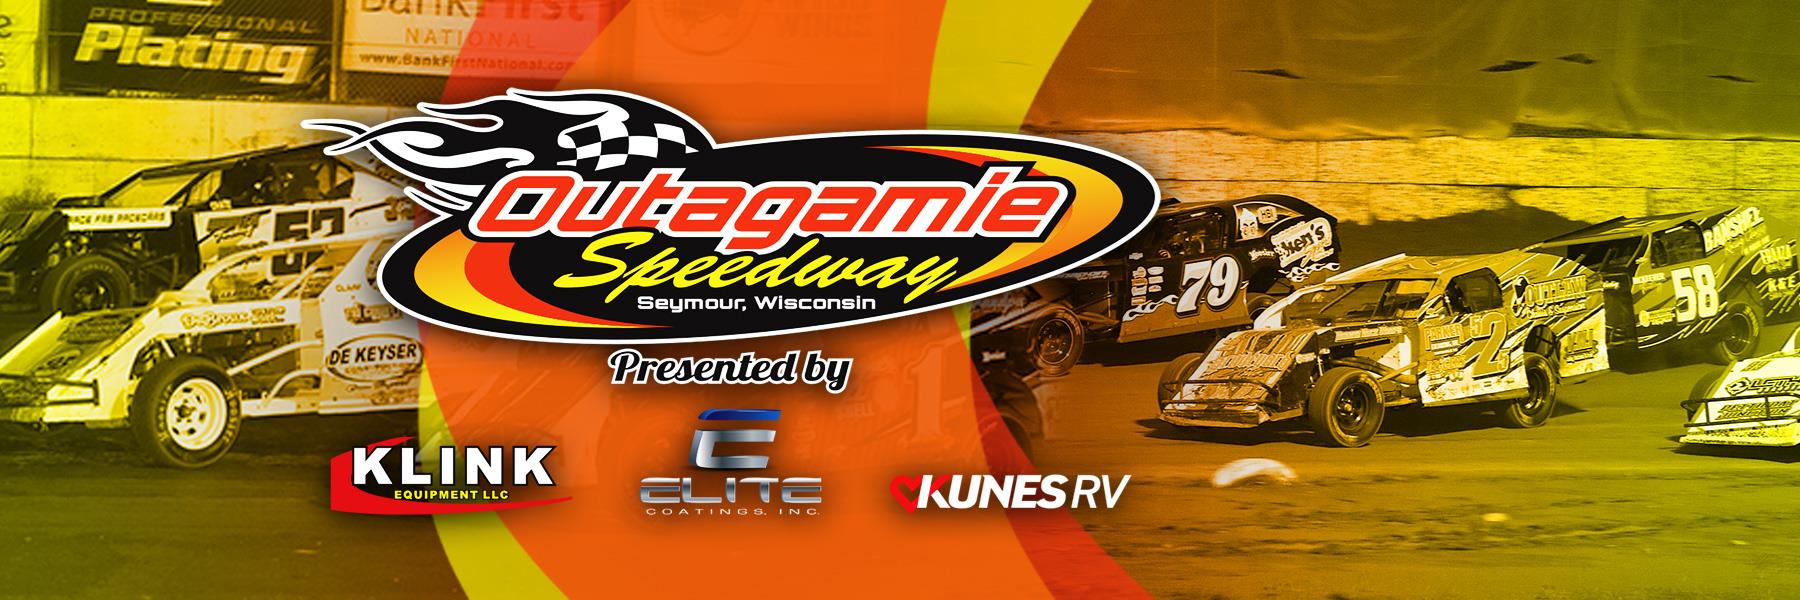 9/17/2022 - Outagamie Speedway